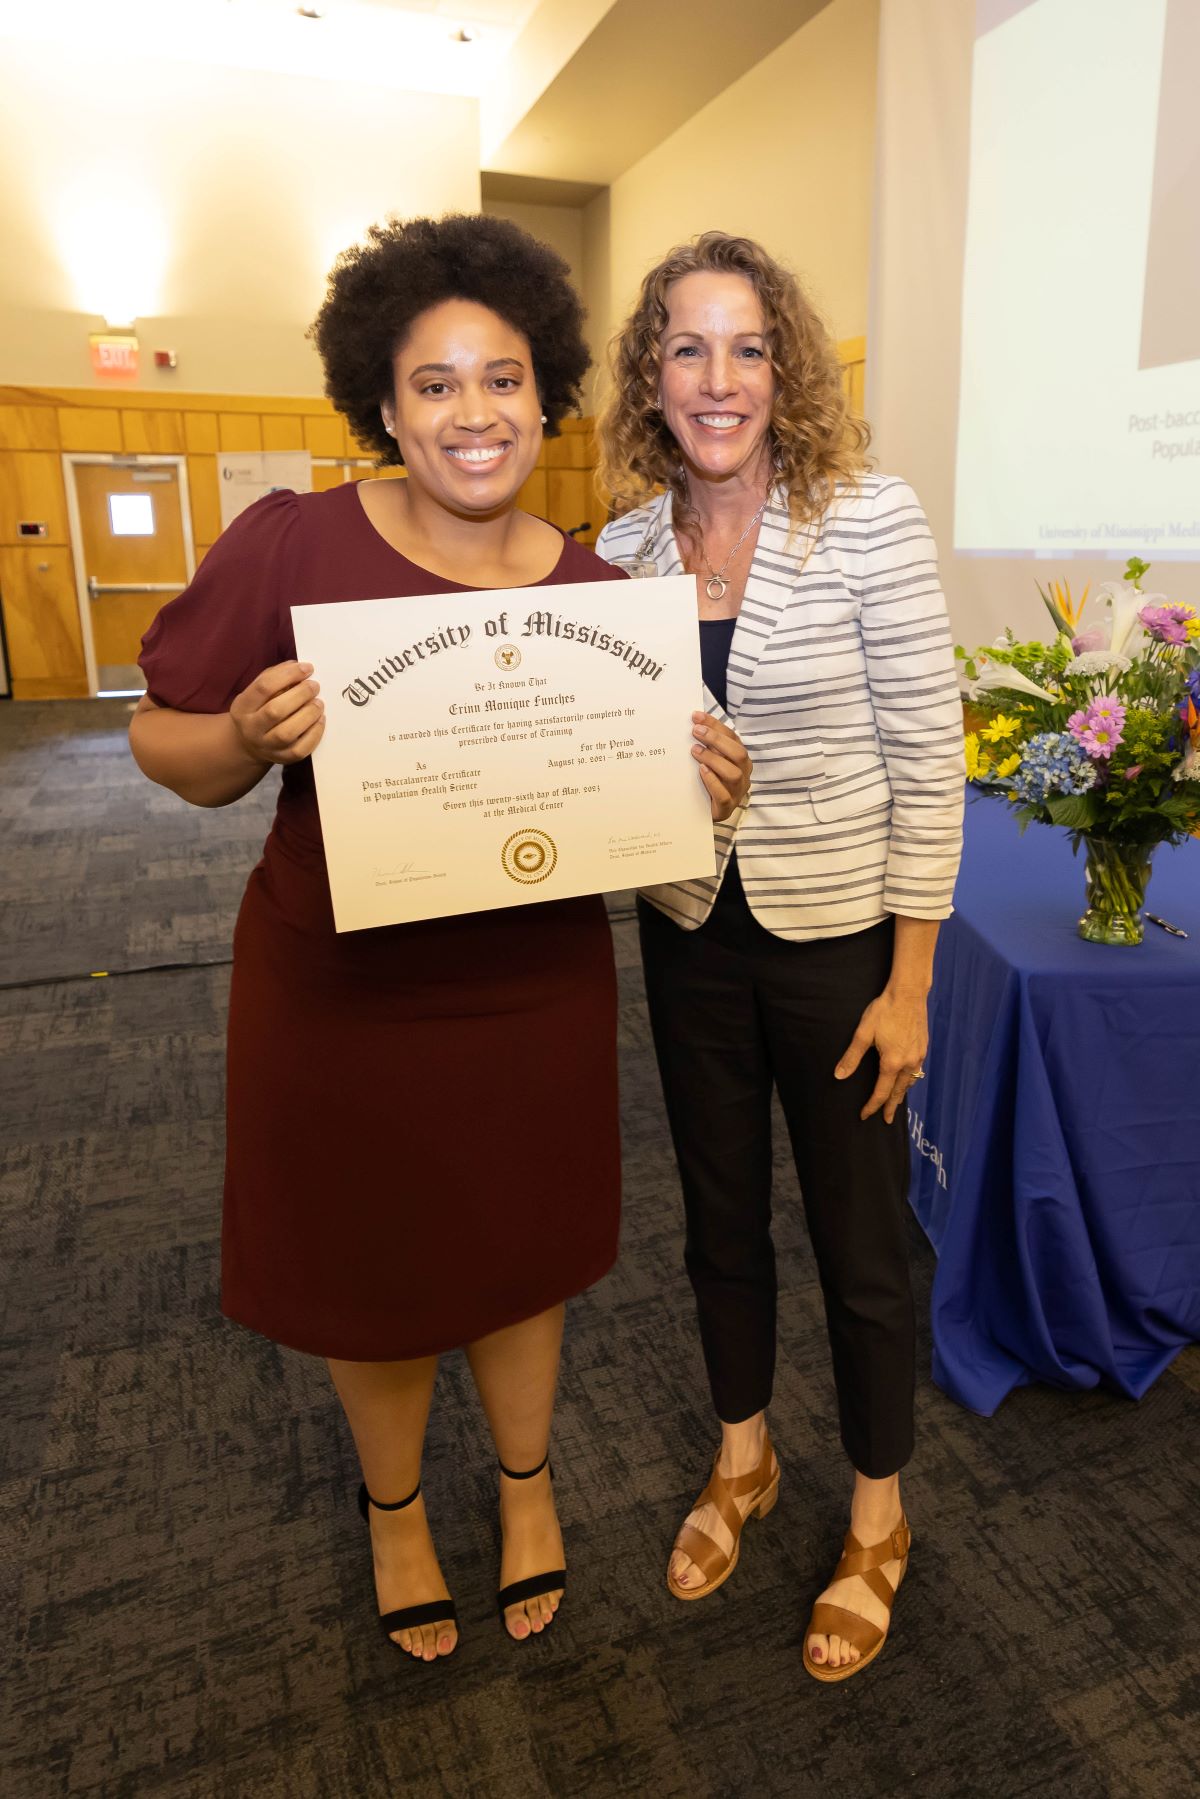 Student and Director - Presentation of certificate for competing the certificate program at the 2023 Honors and Awards Ceremony